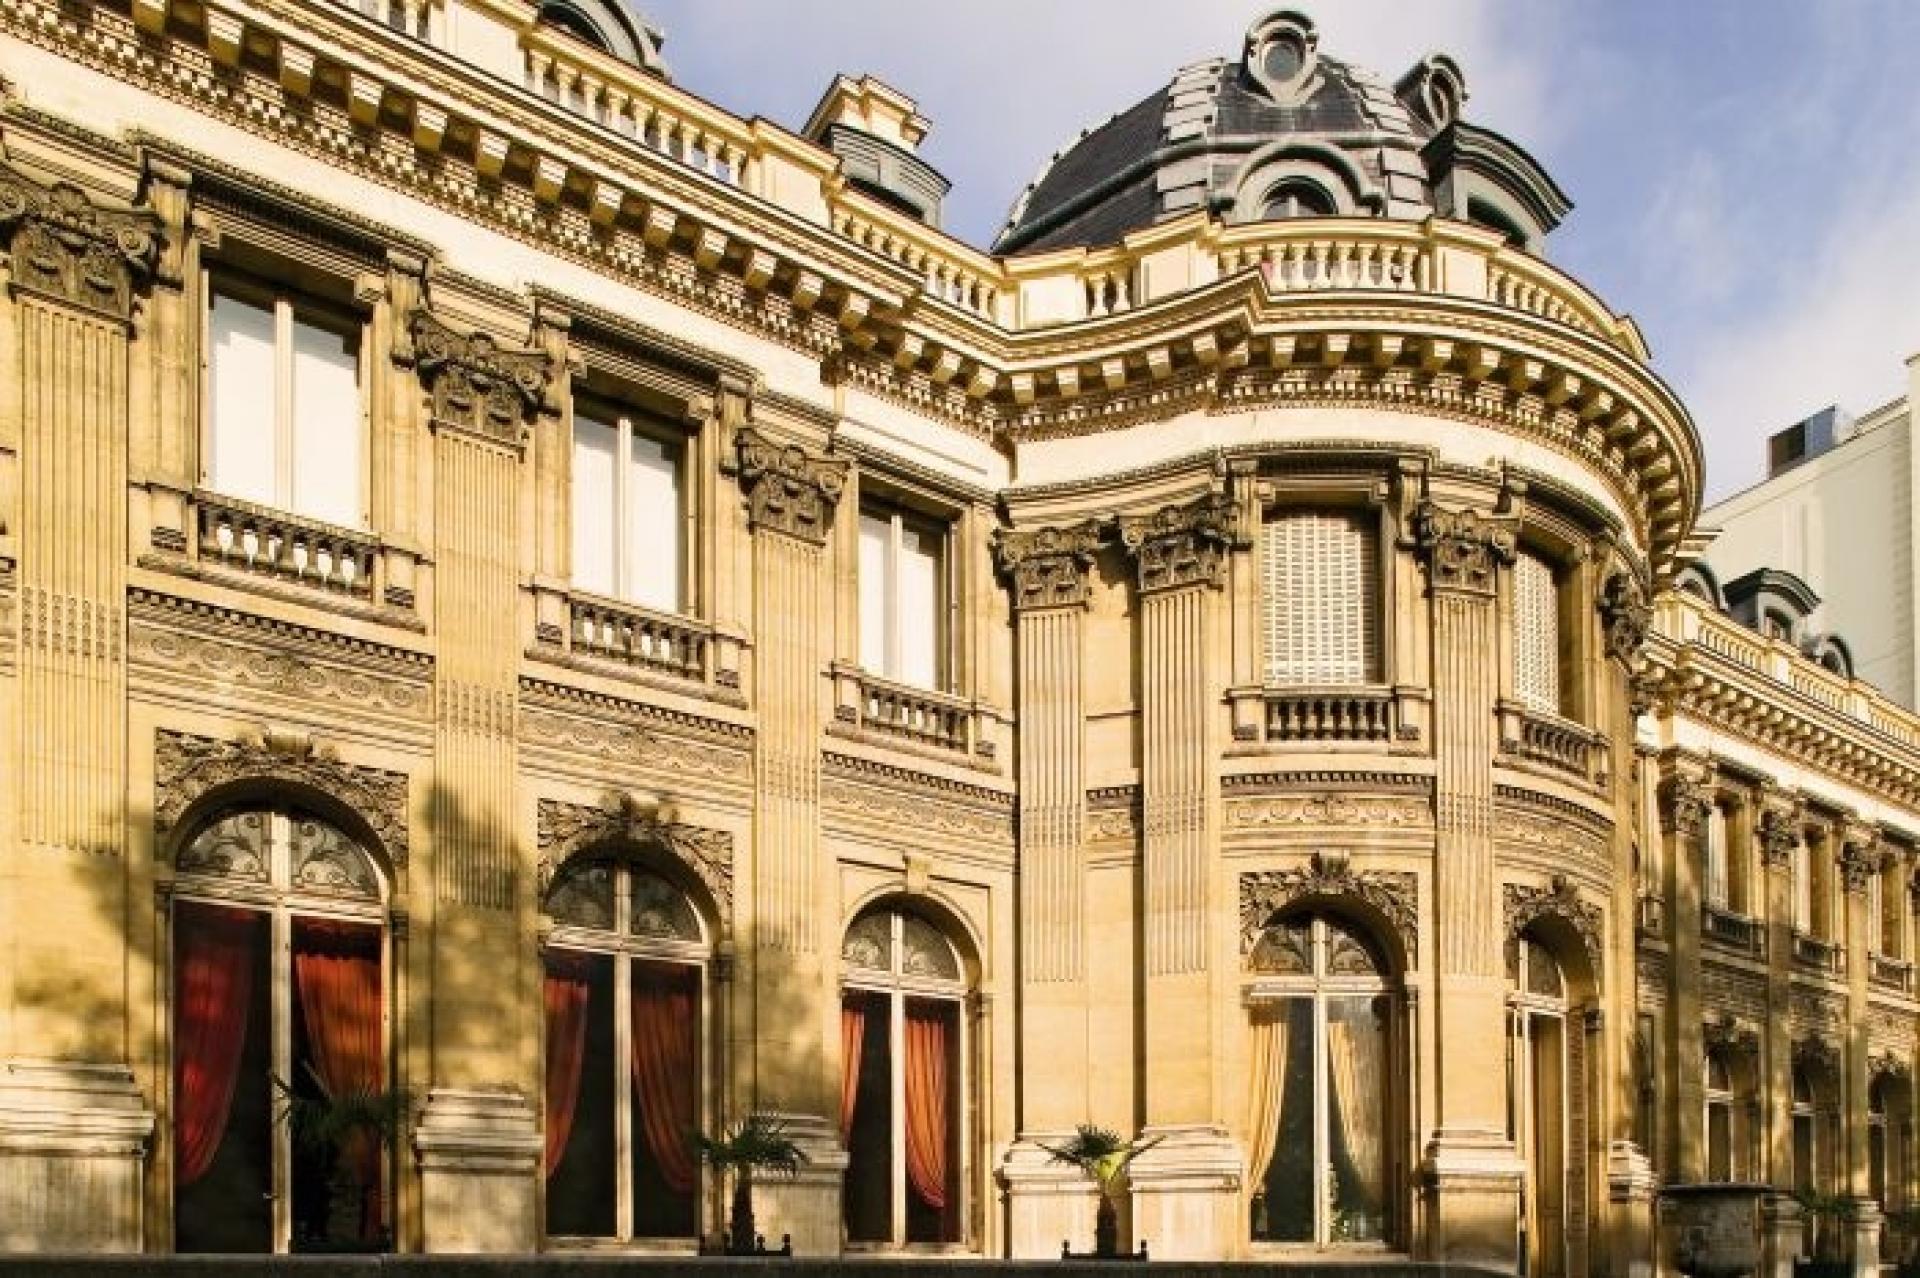 The Jacquemart André Museum is a 10-minute walk from the hotel